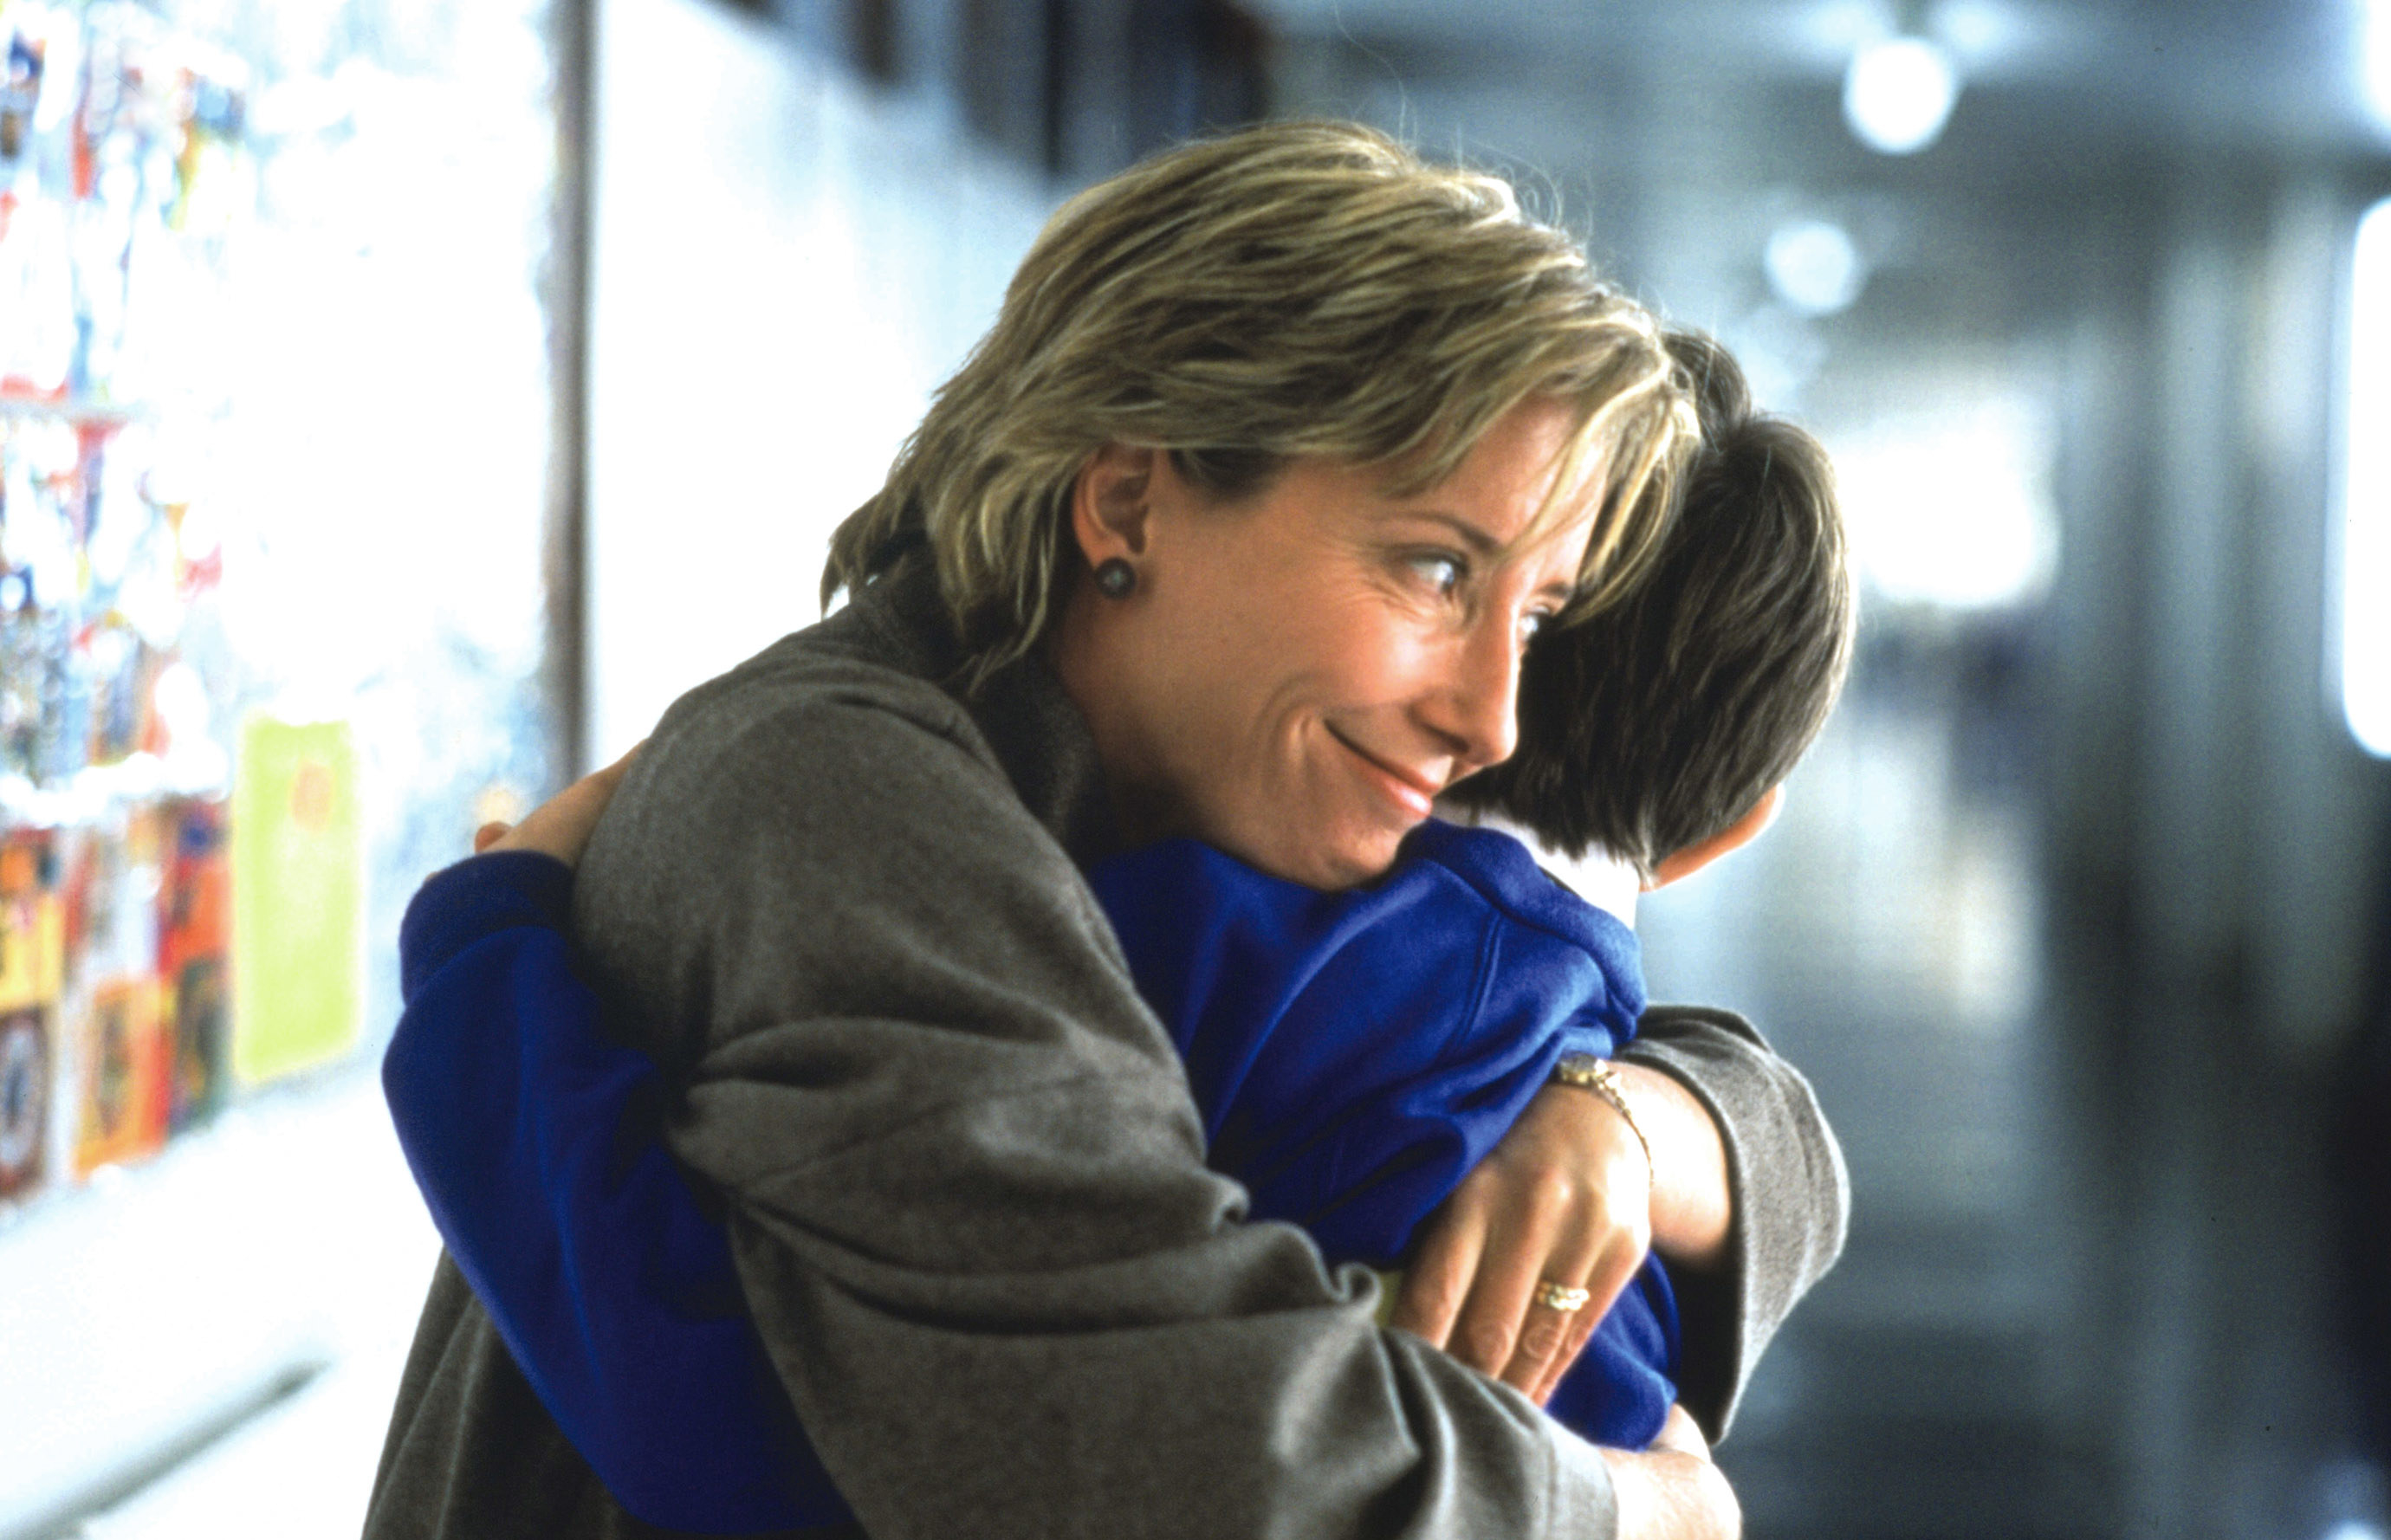 A younger Emma hugging a child during a movie scene